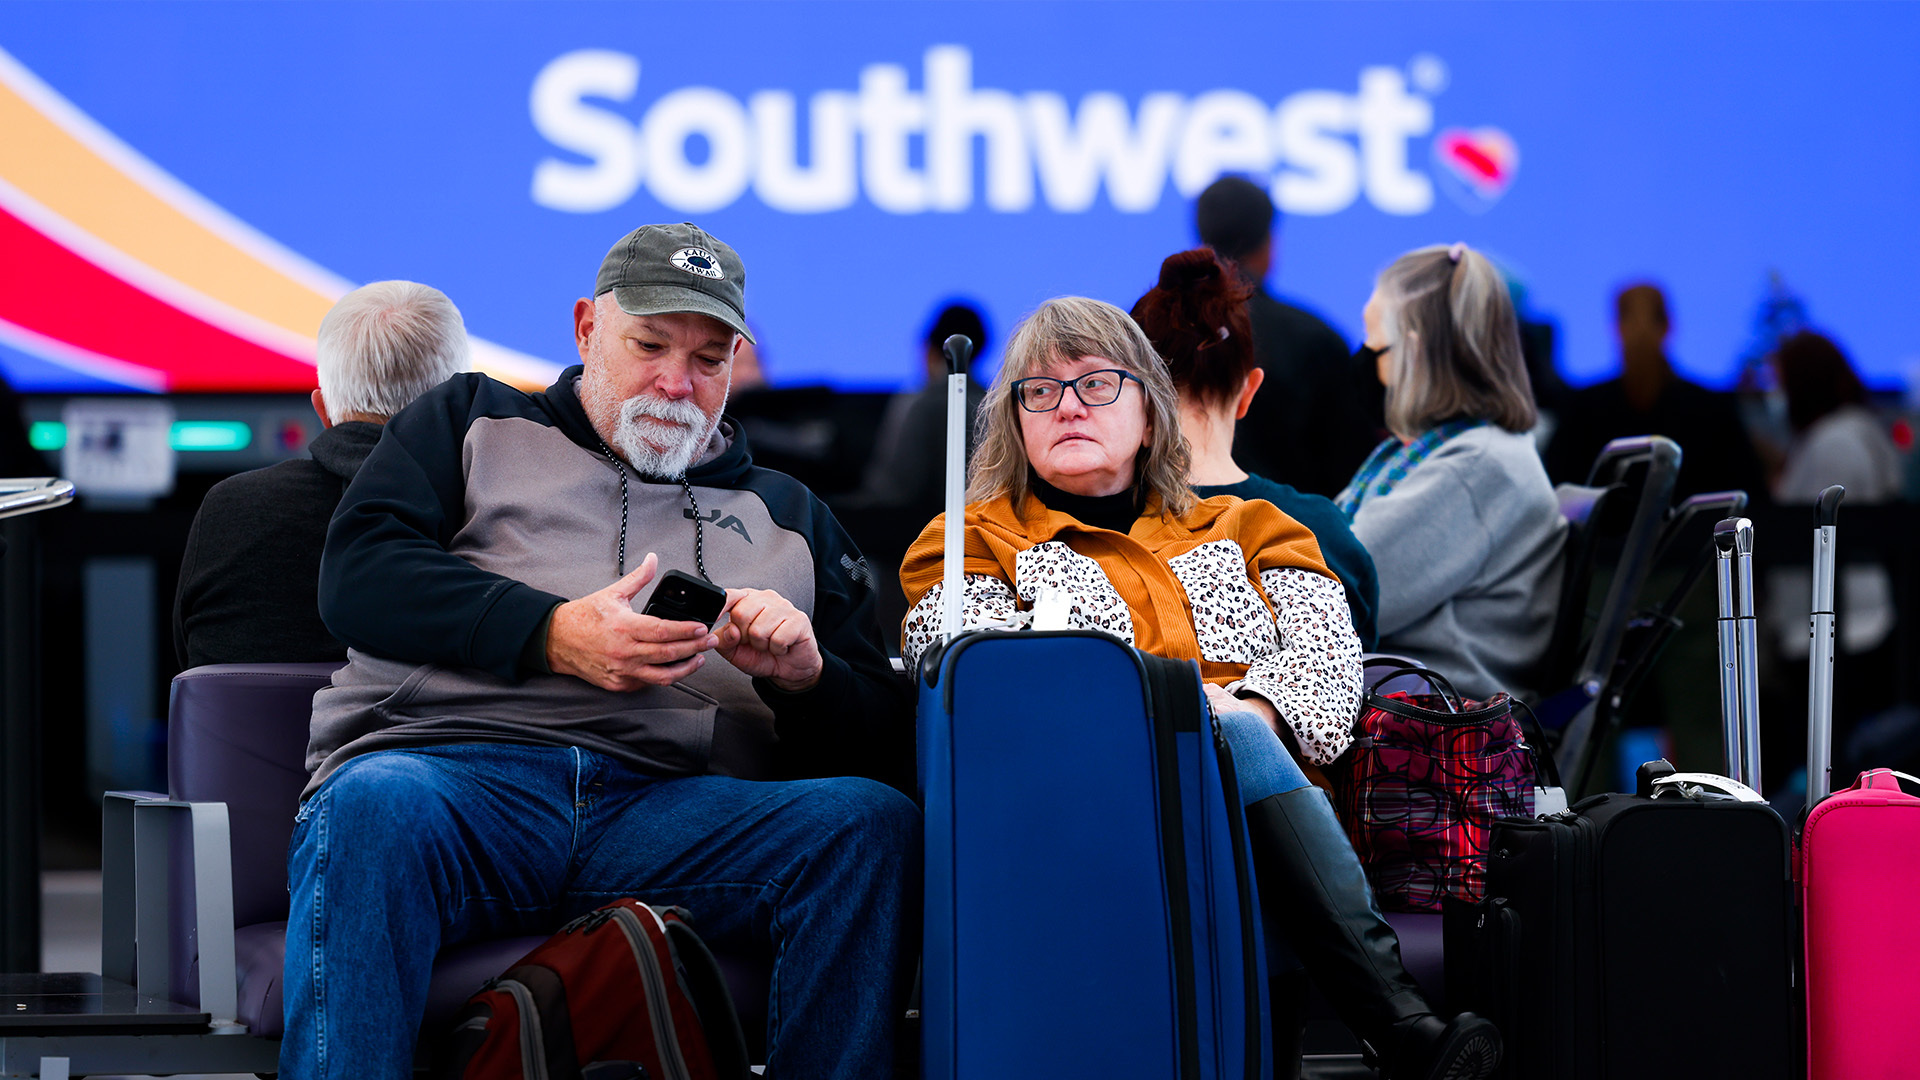 Southwest Airlines is facing a record 0 million penalty over last year's holiday hellscape. The meltdown affected 2 million passengers.